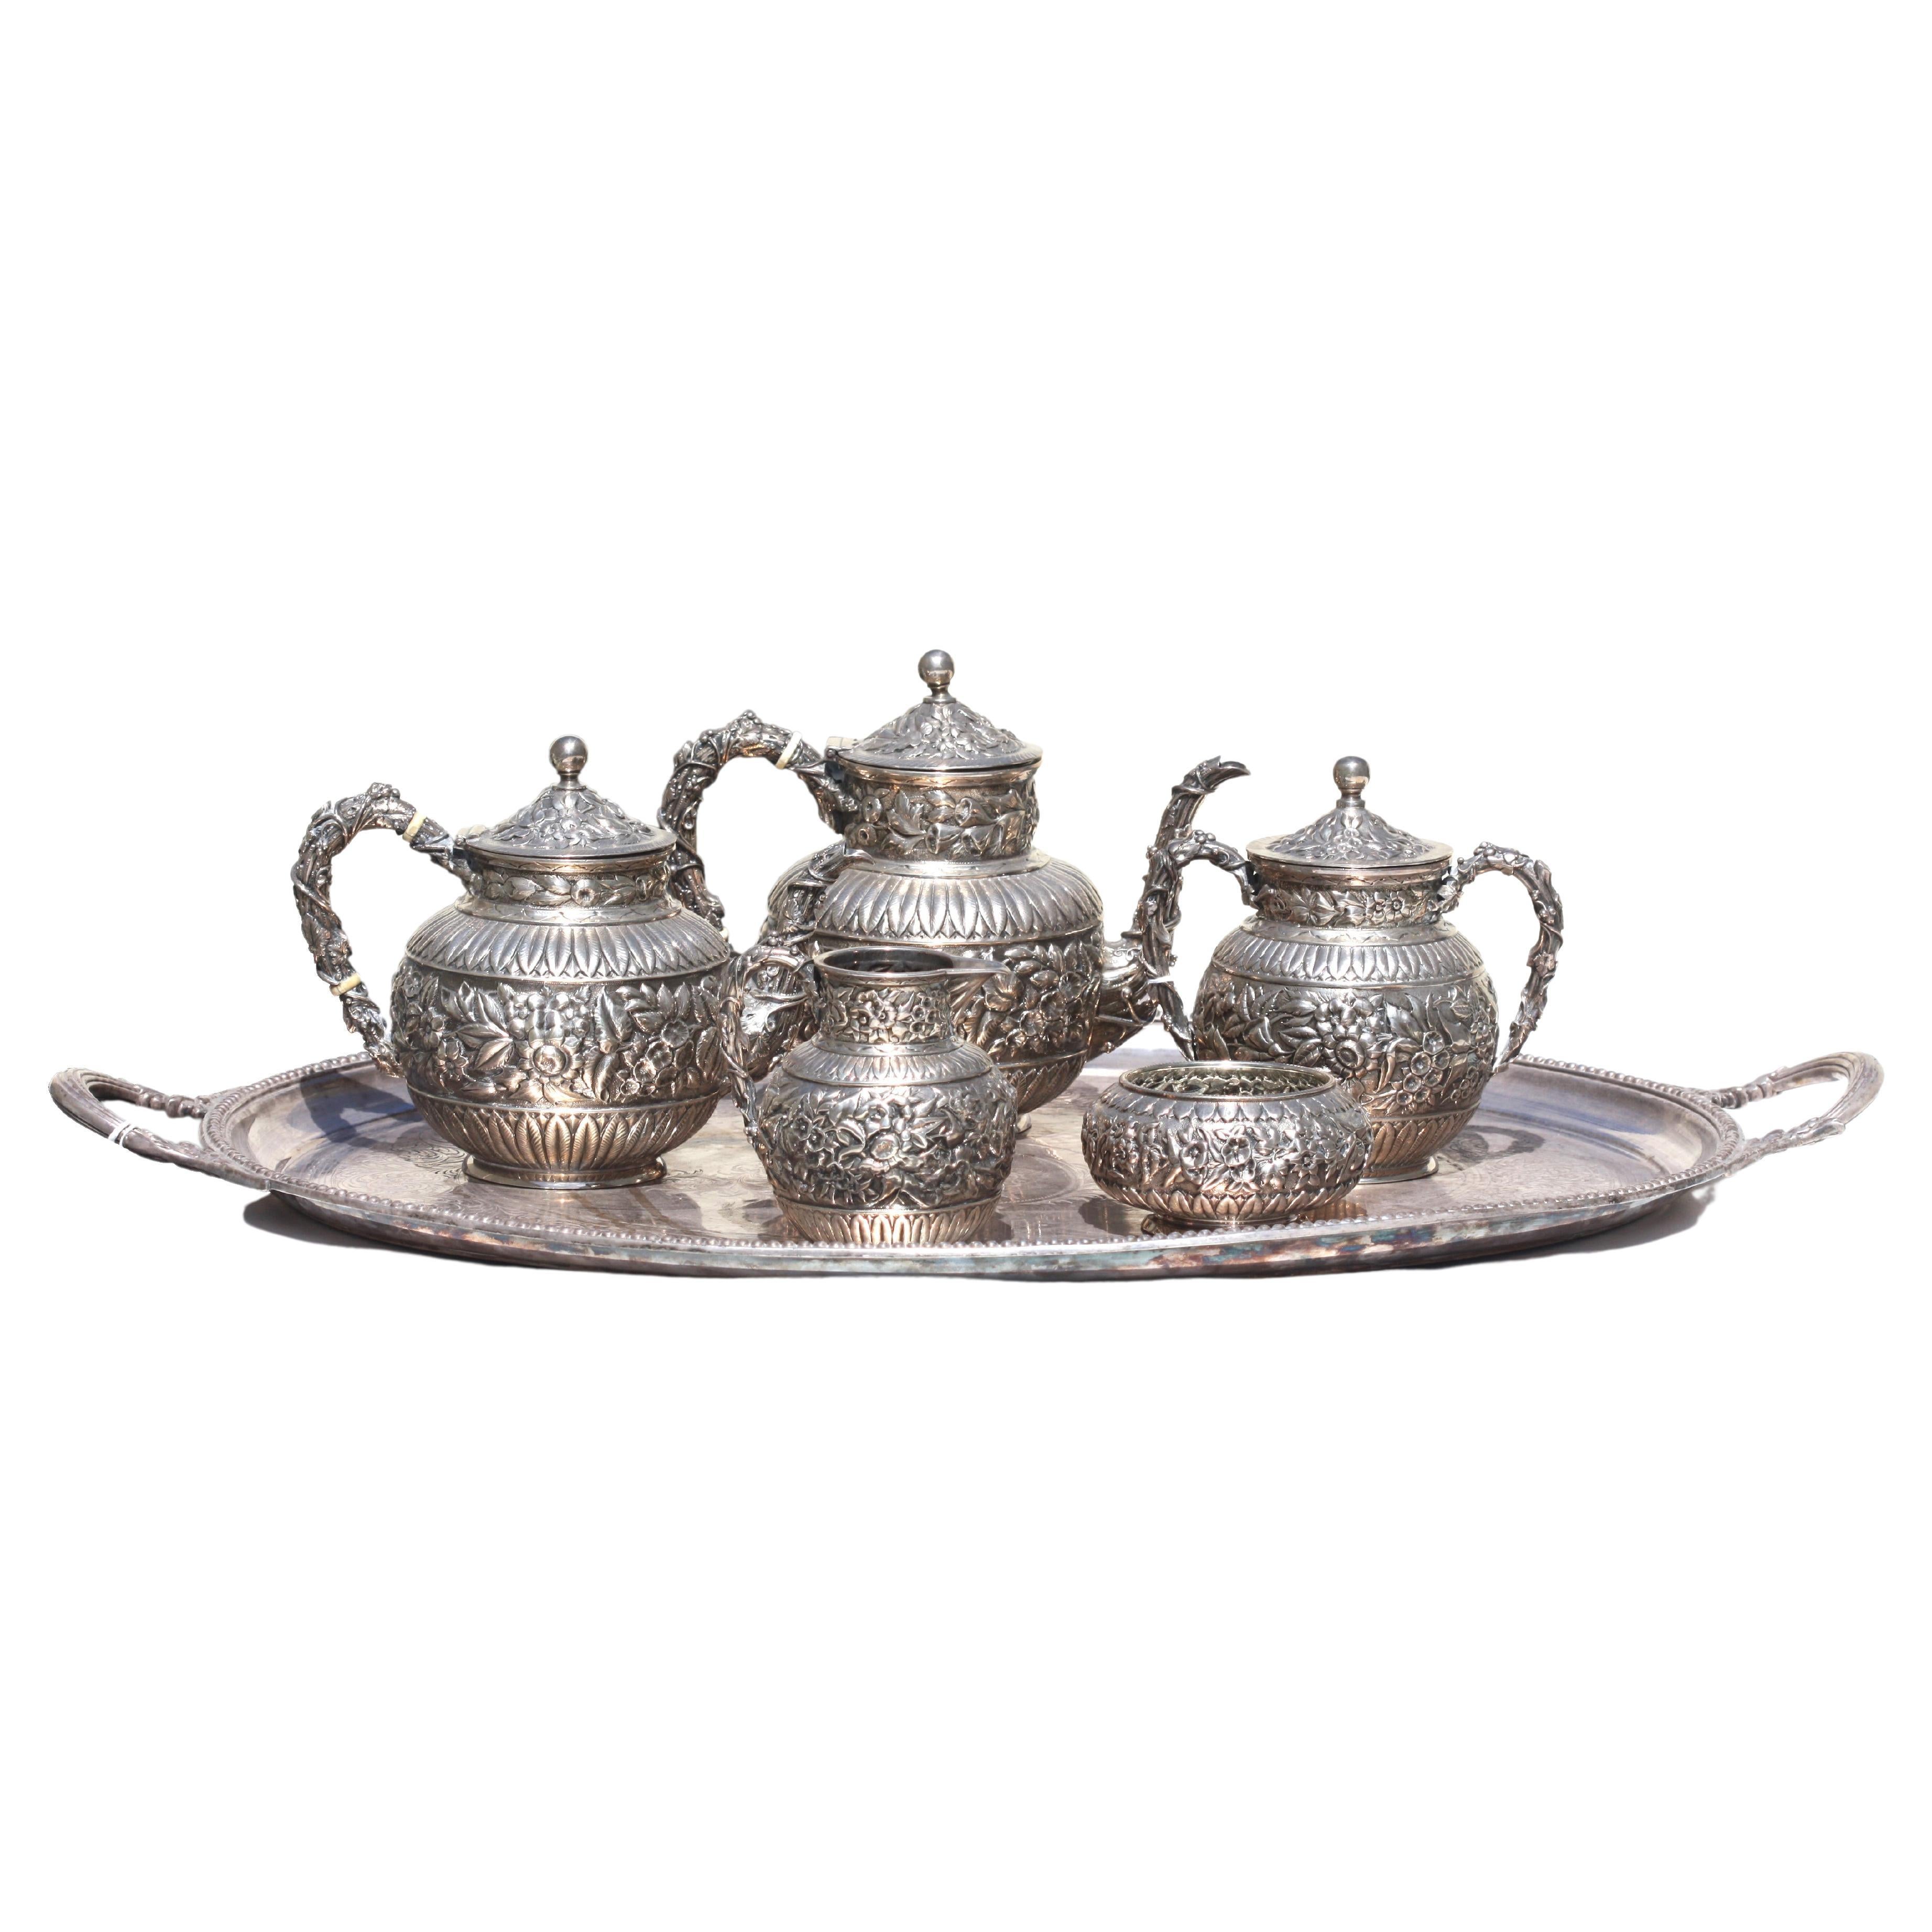 J.E. Caldwell & Co., Silver Five-Piece Tea & Coffee Service together with an Elk